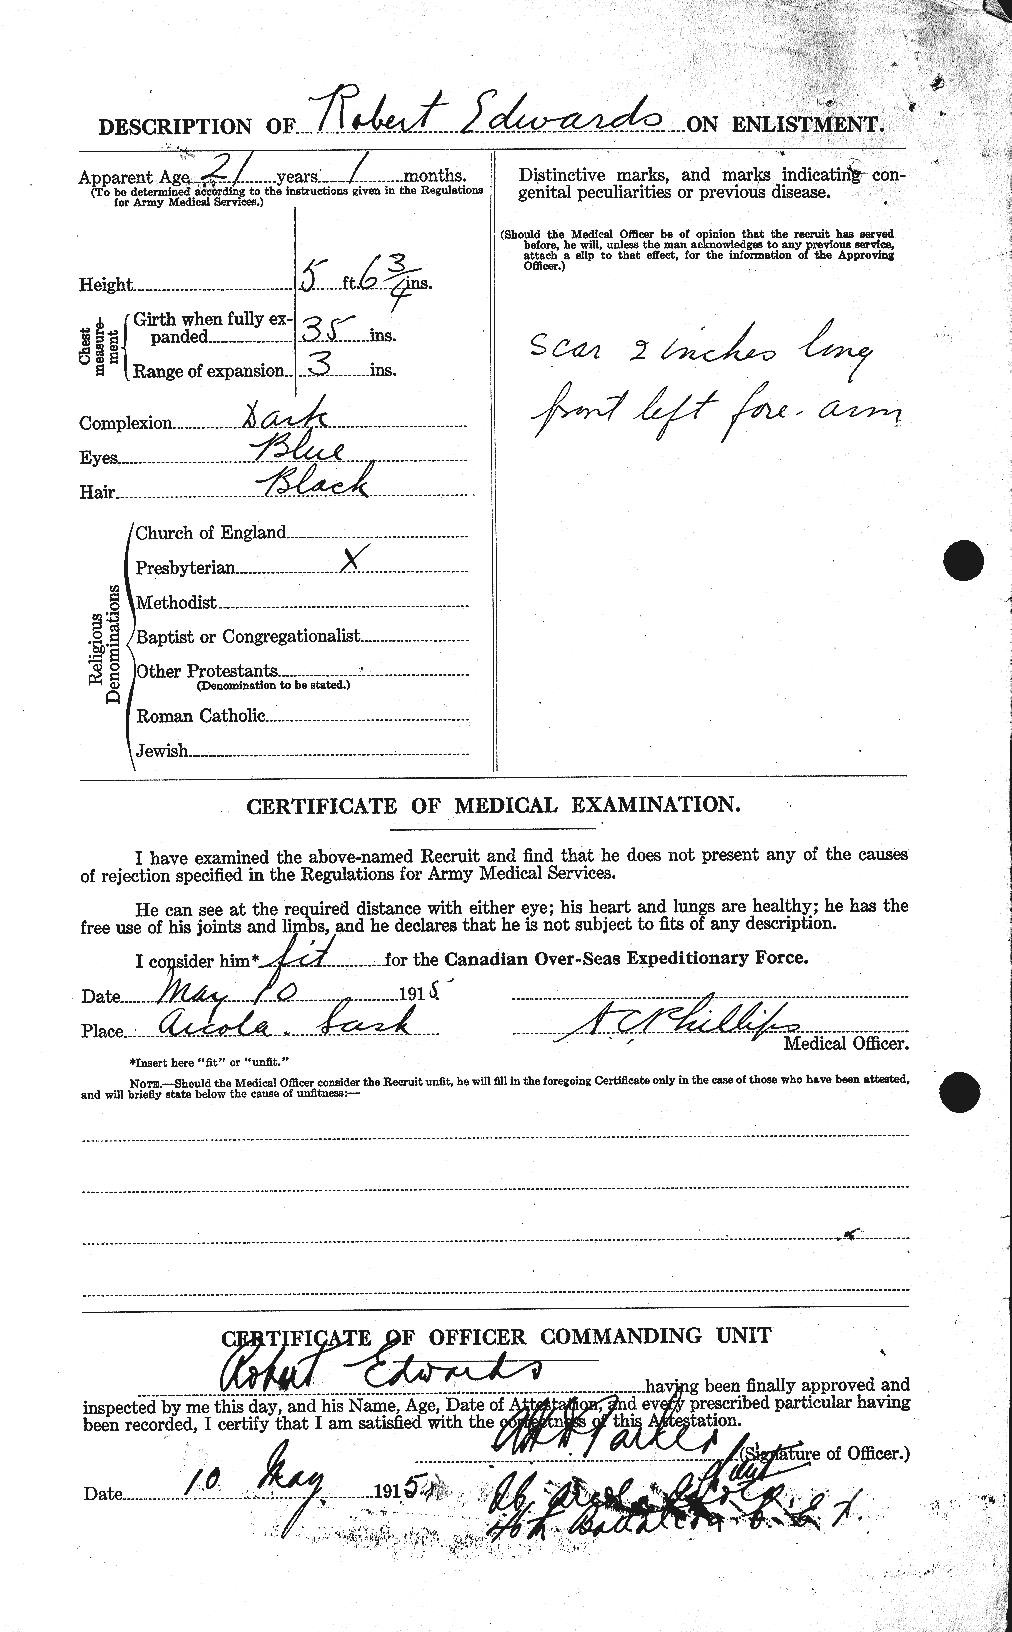 Personnel Records of the First World War - CEF 310264b